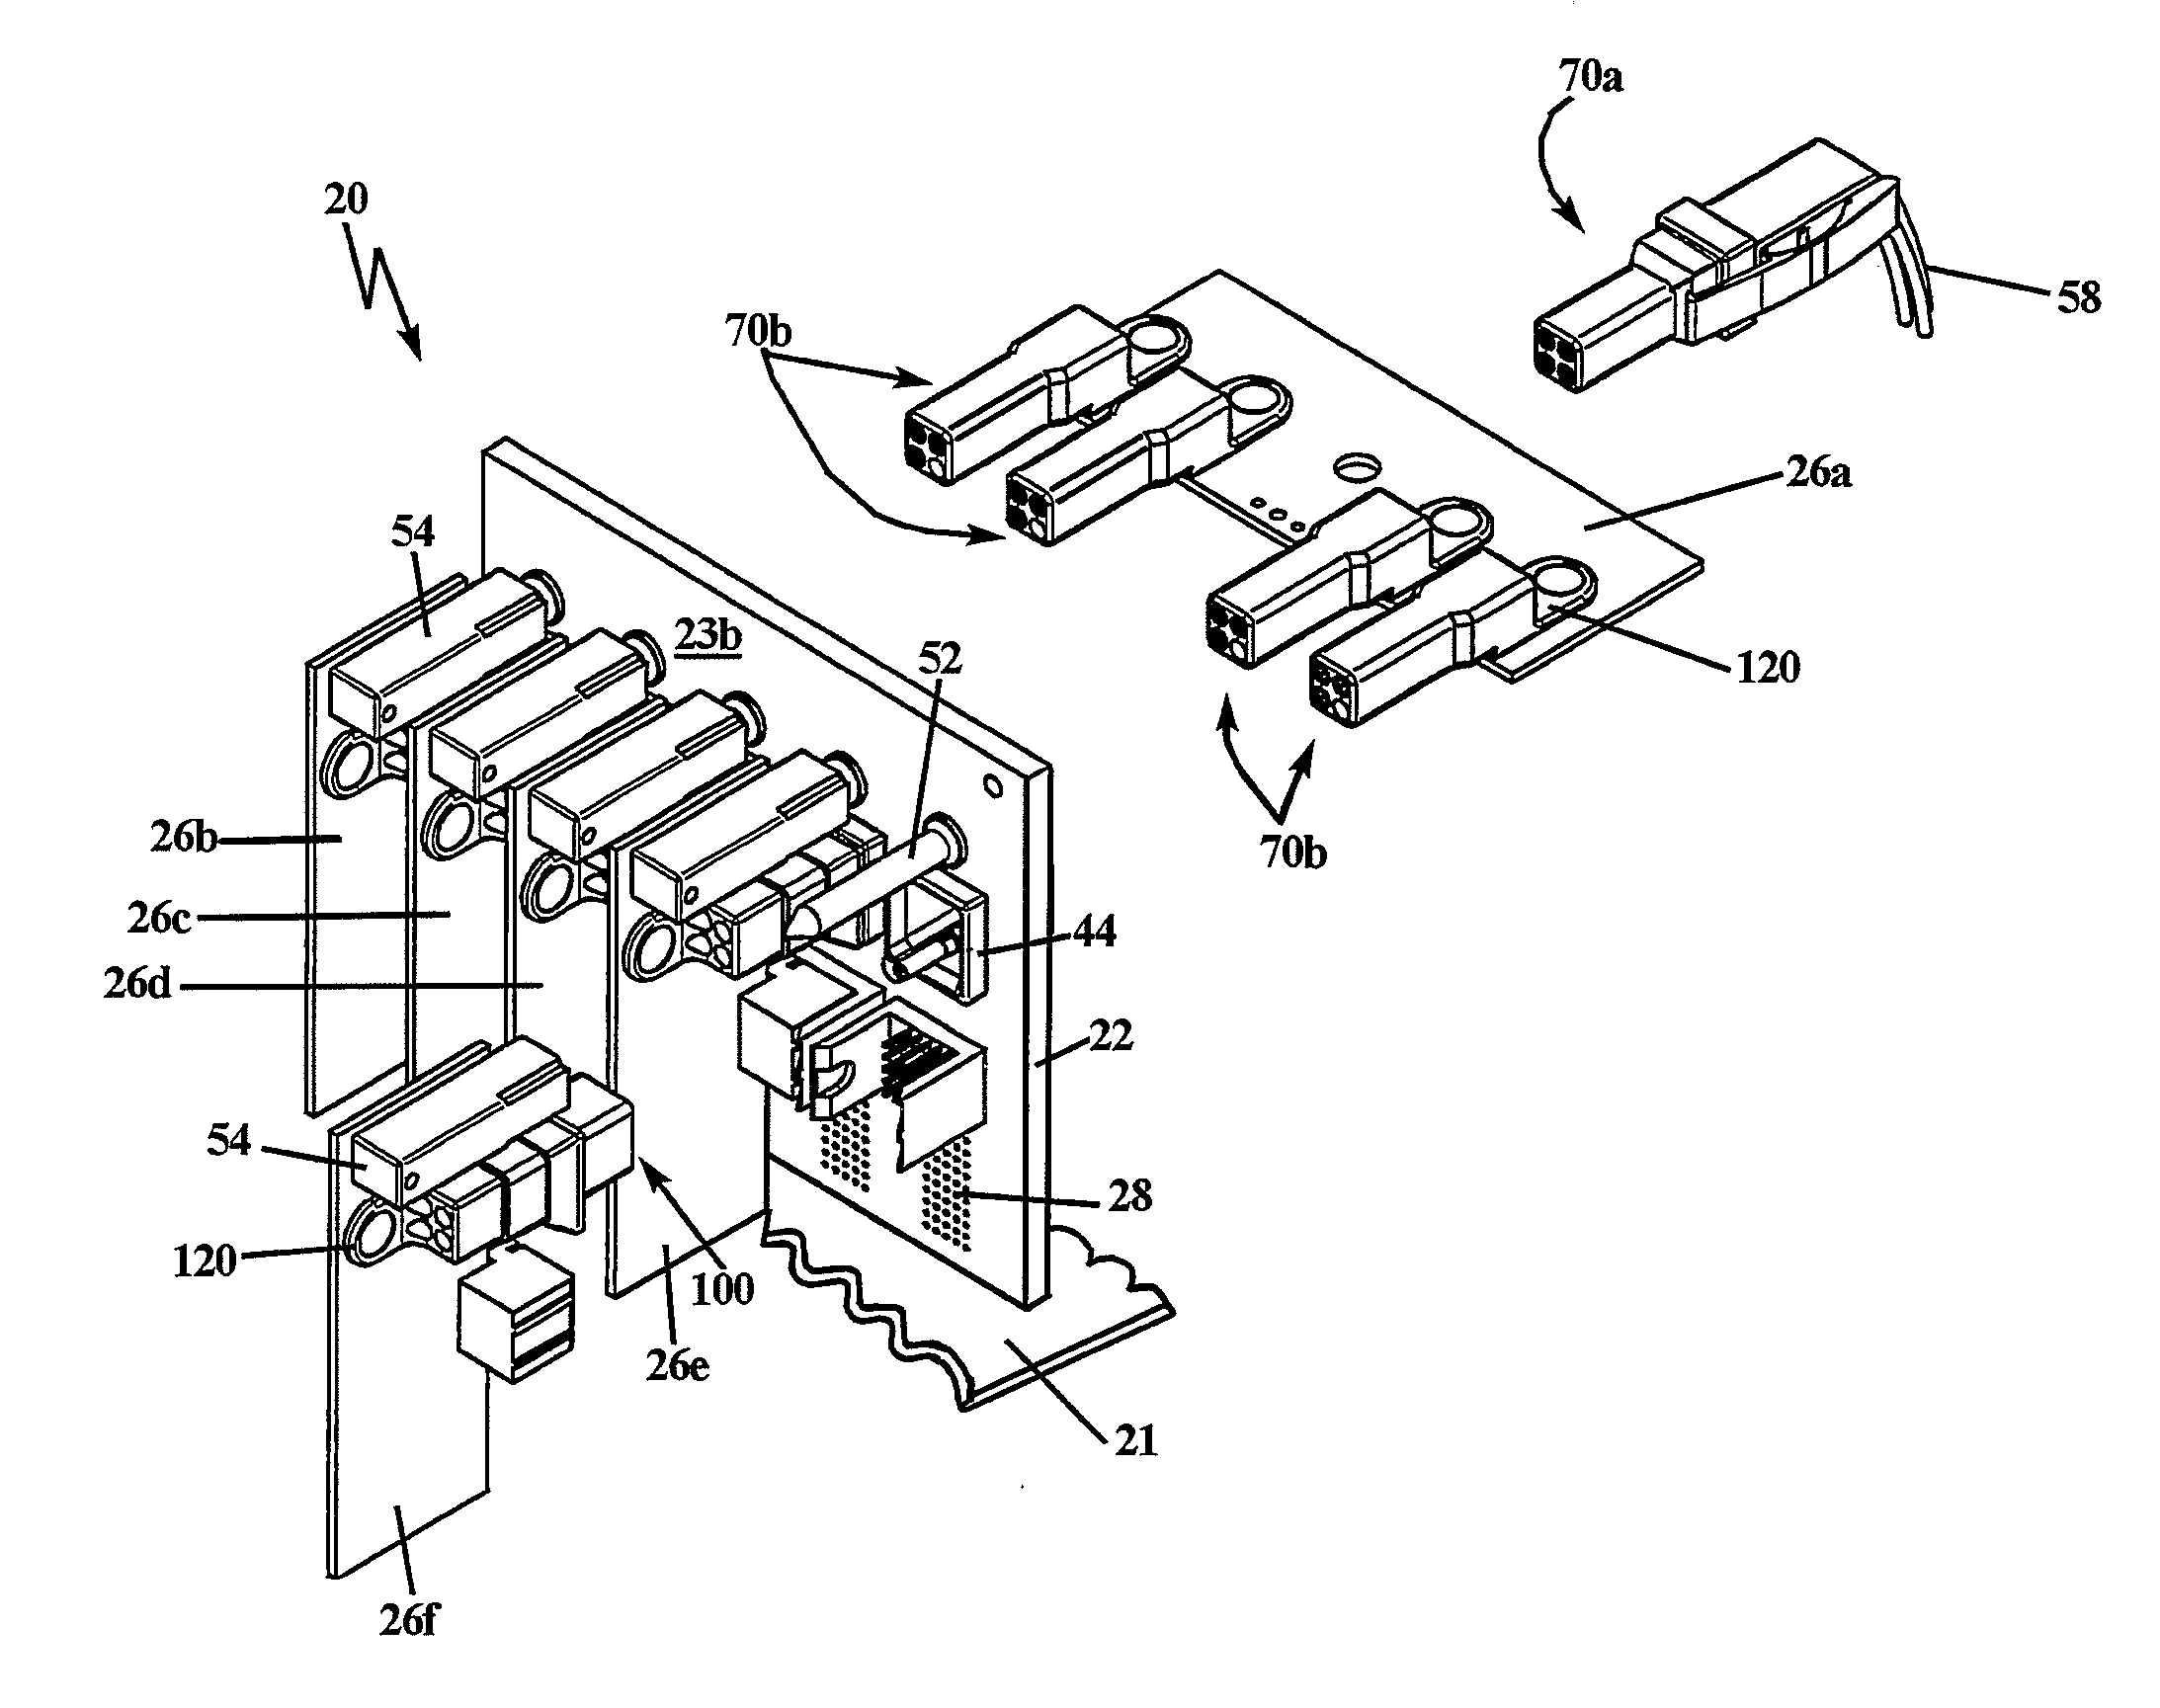 Method and apparatus for making an interconnection between power and signal cables